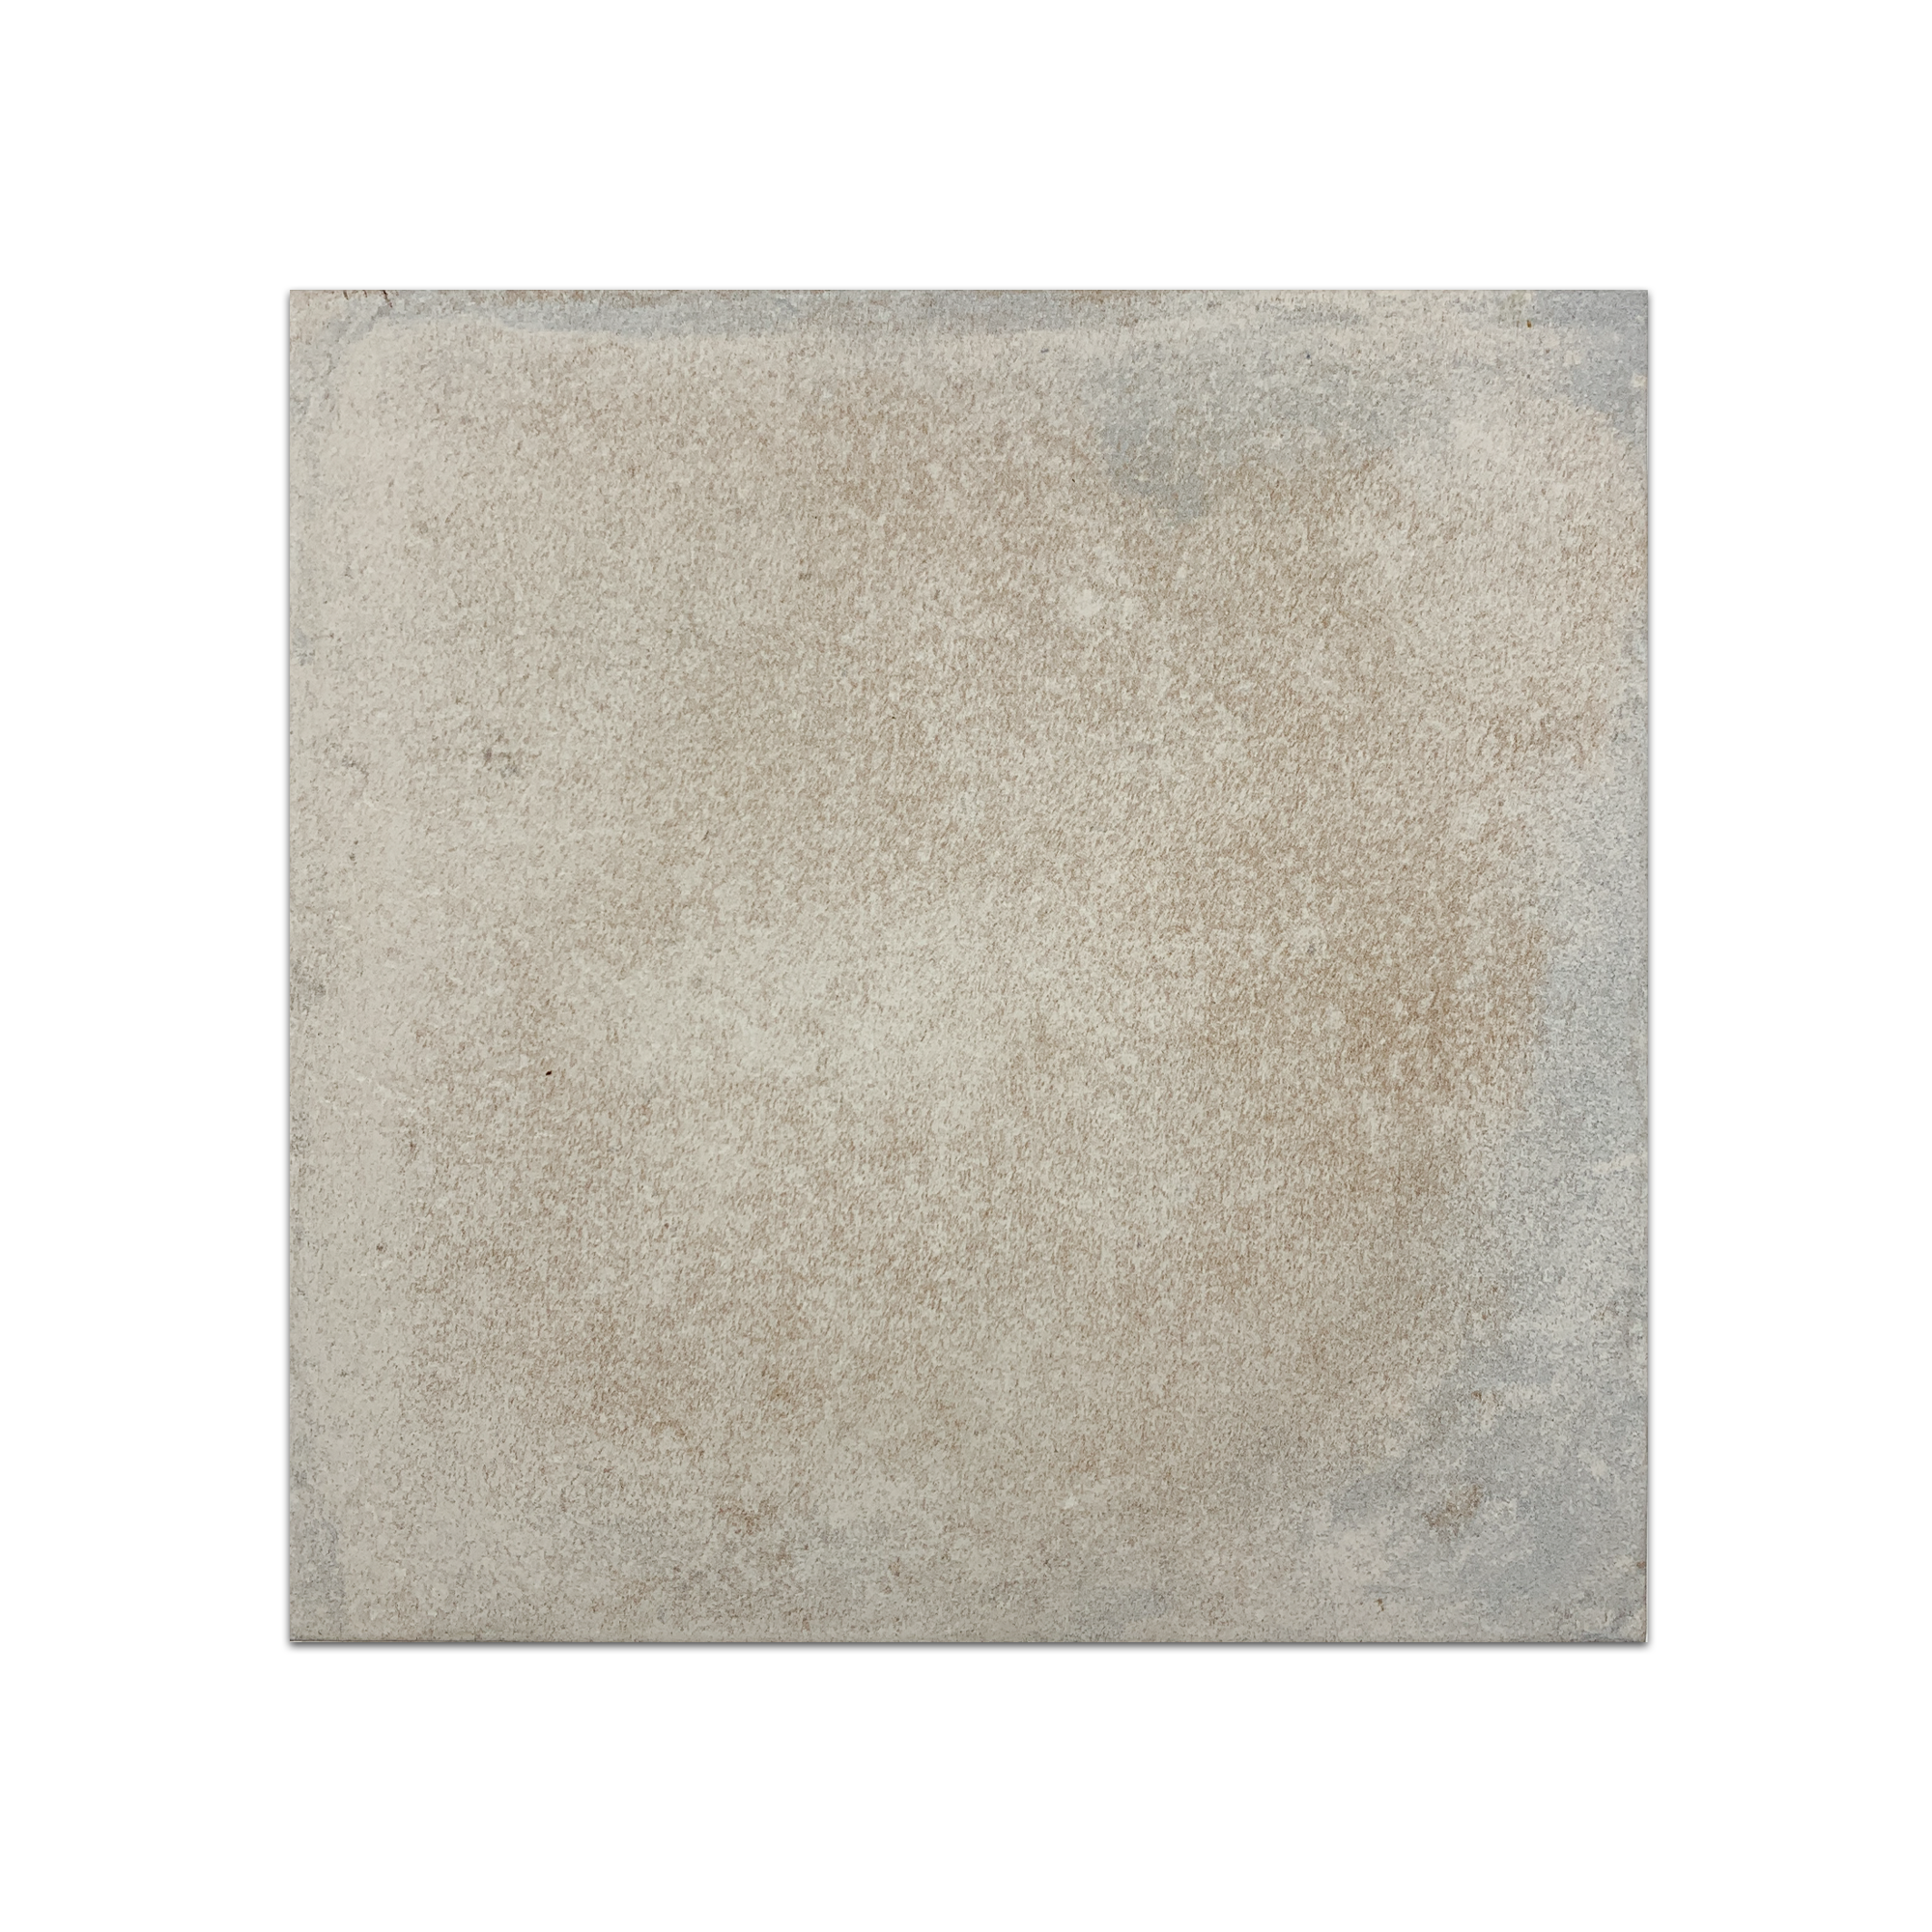 Elon Boston Brick Downtown Porcelain Square Field Tile 14x14x0.375 Natural Pressed BC112 Surface Group International Product